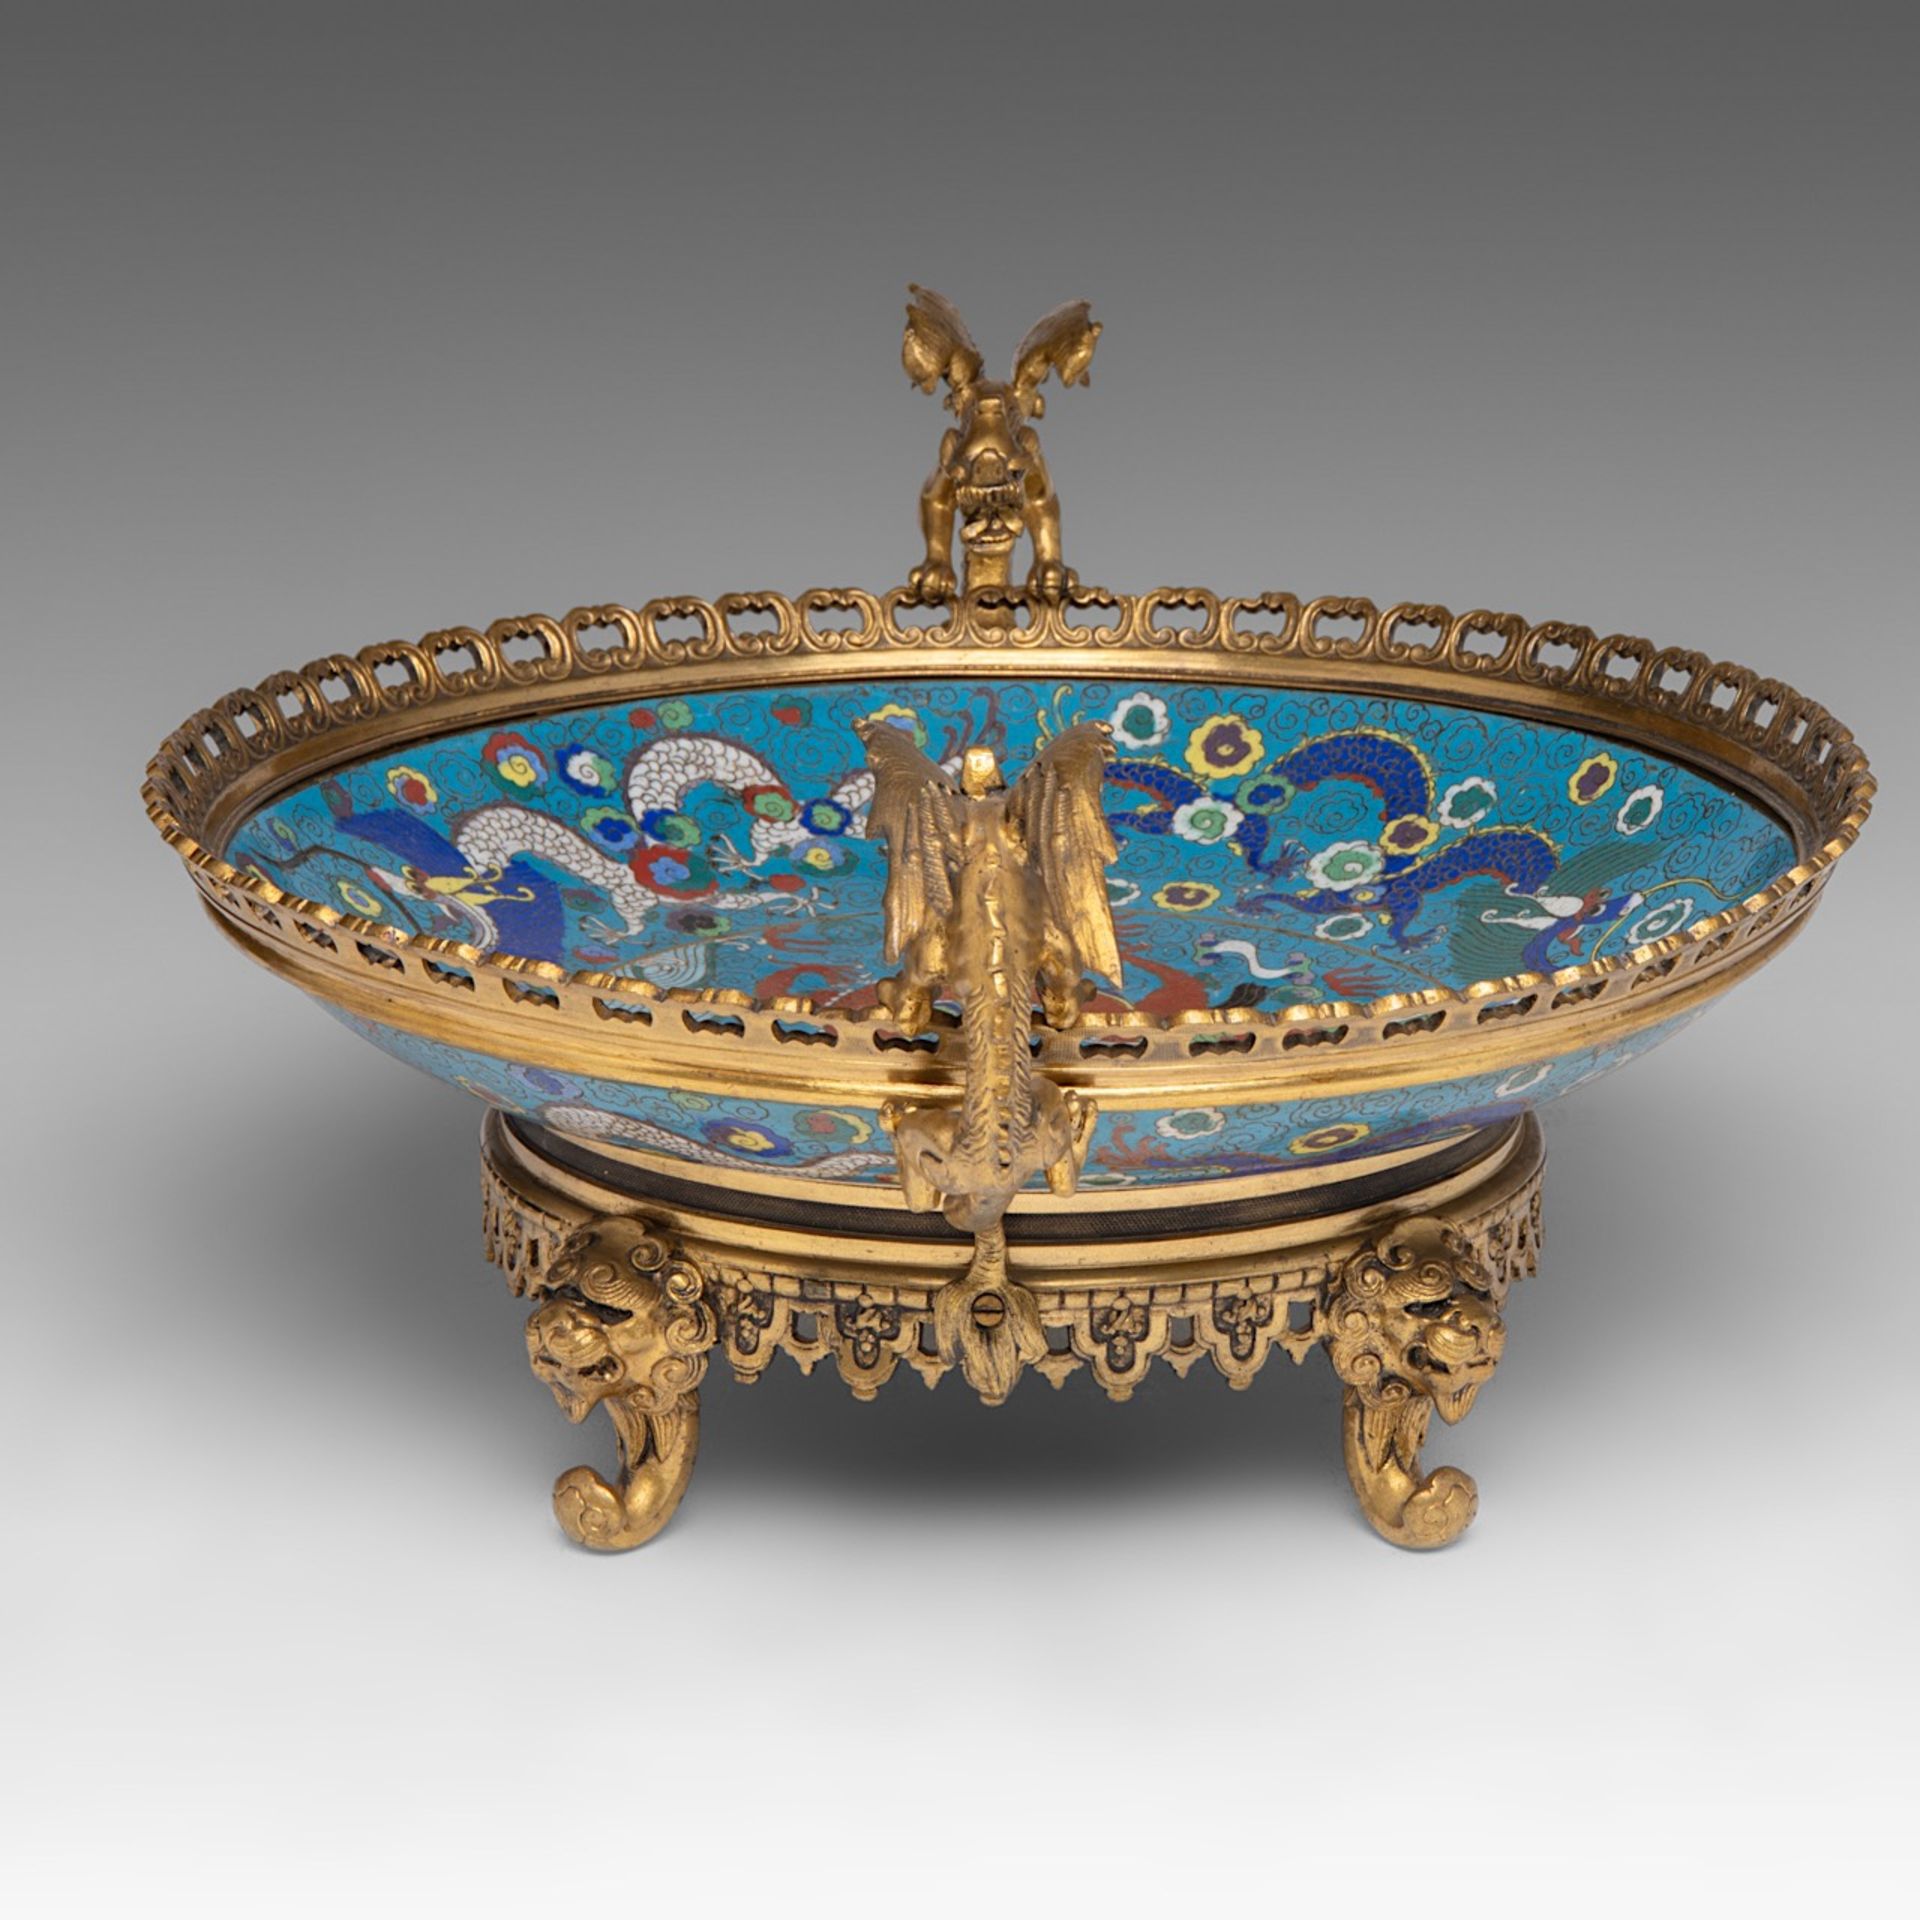 A Chinese cloisonne enamelled 'Dragon' plate, raised on gilt bronze mounts, 19thC, dia 31,5 cm - Image 5 of 9